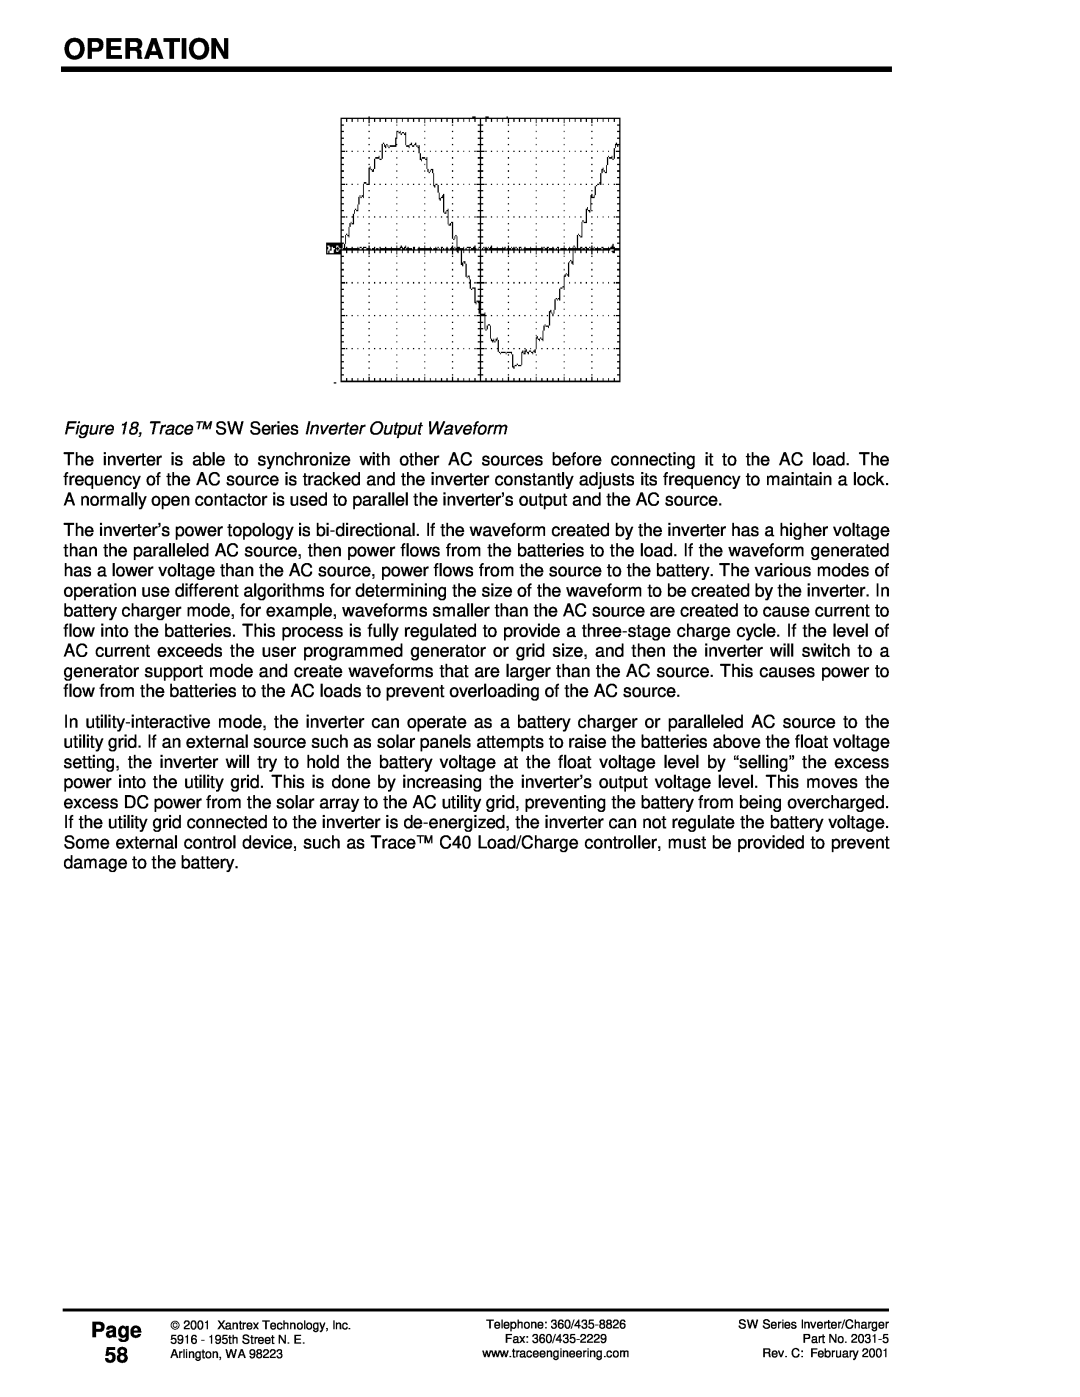 Xantrex Technology SW Series owner manual Operation, Page 58 